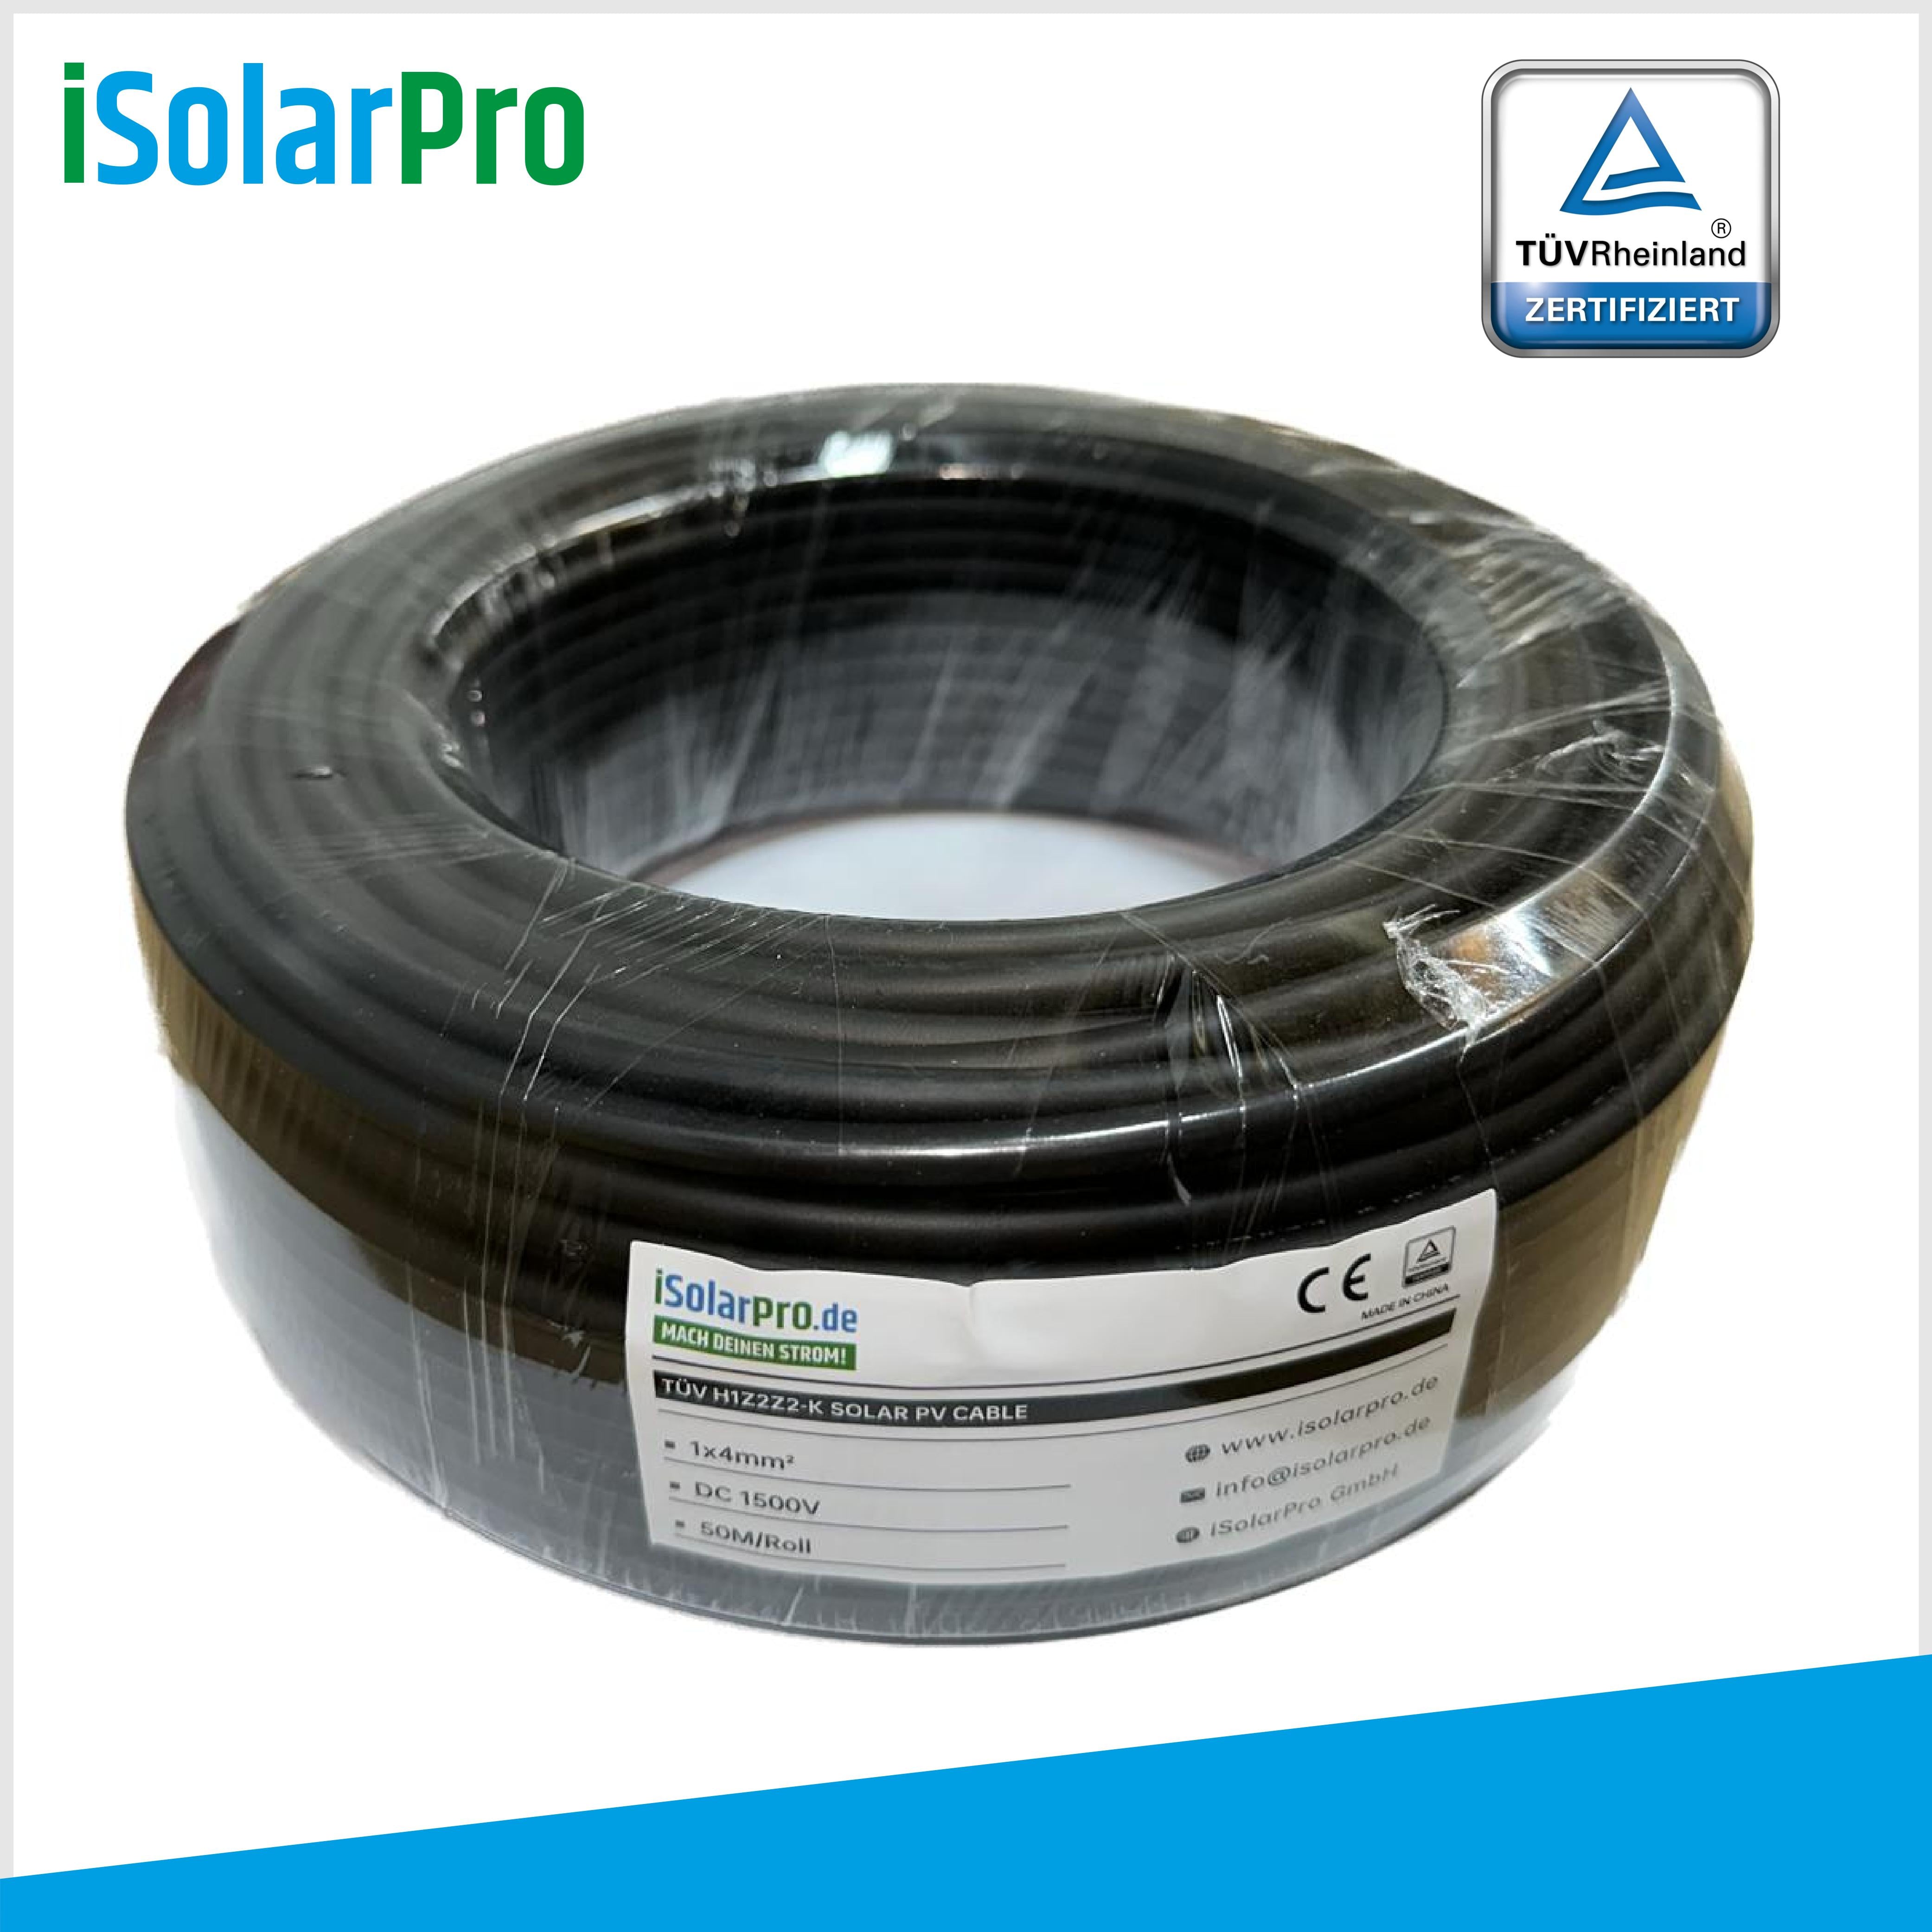 50m solar cable 4 mm² photovoltaic cable for PV systems black 